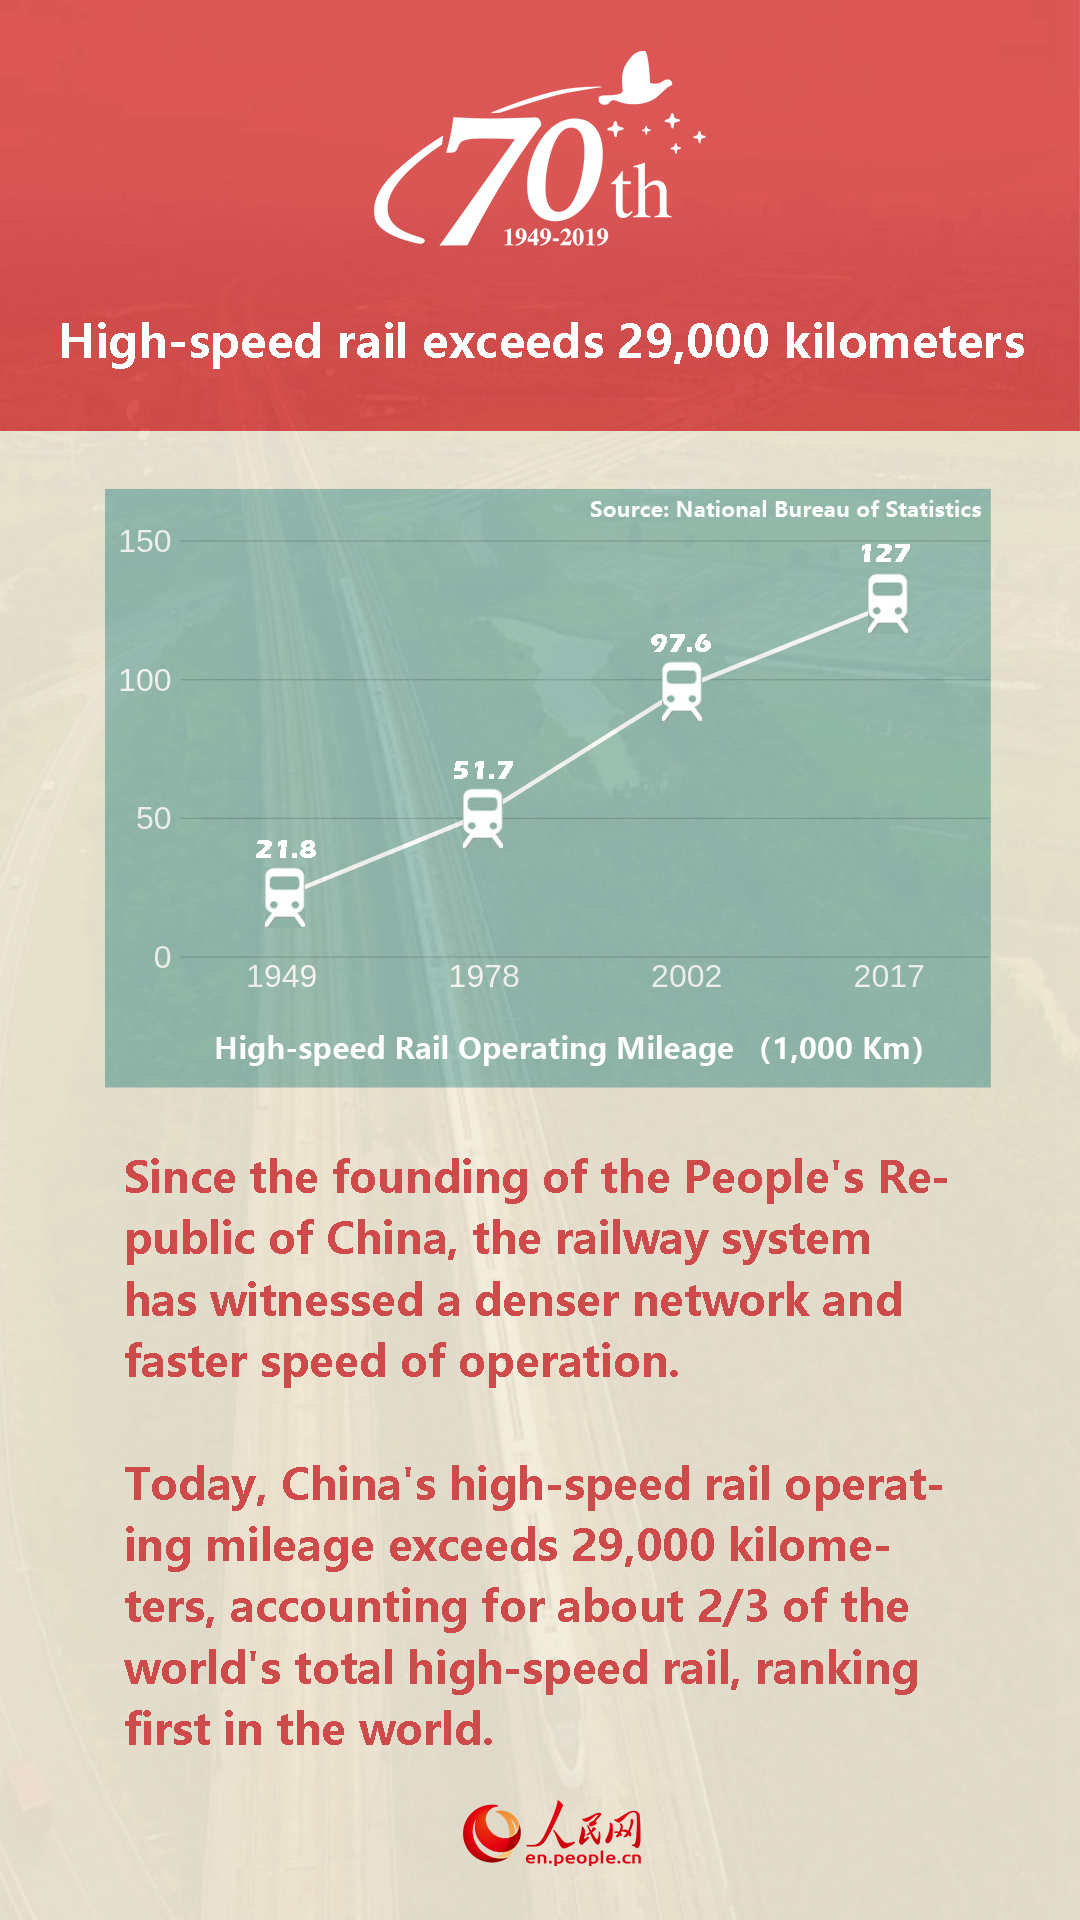 China in 70 years: High-speed rail exceeds 29,000 kilometers